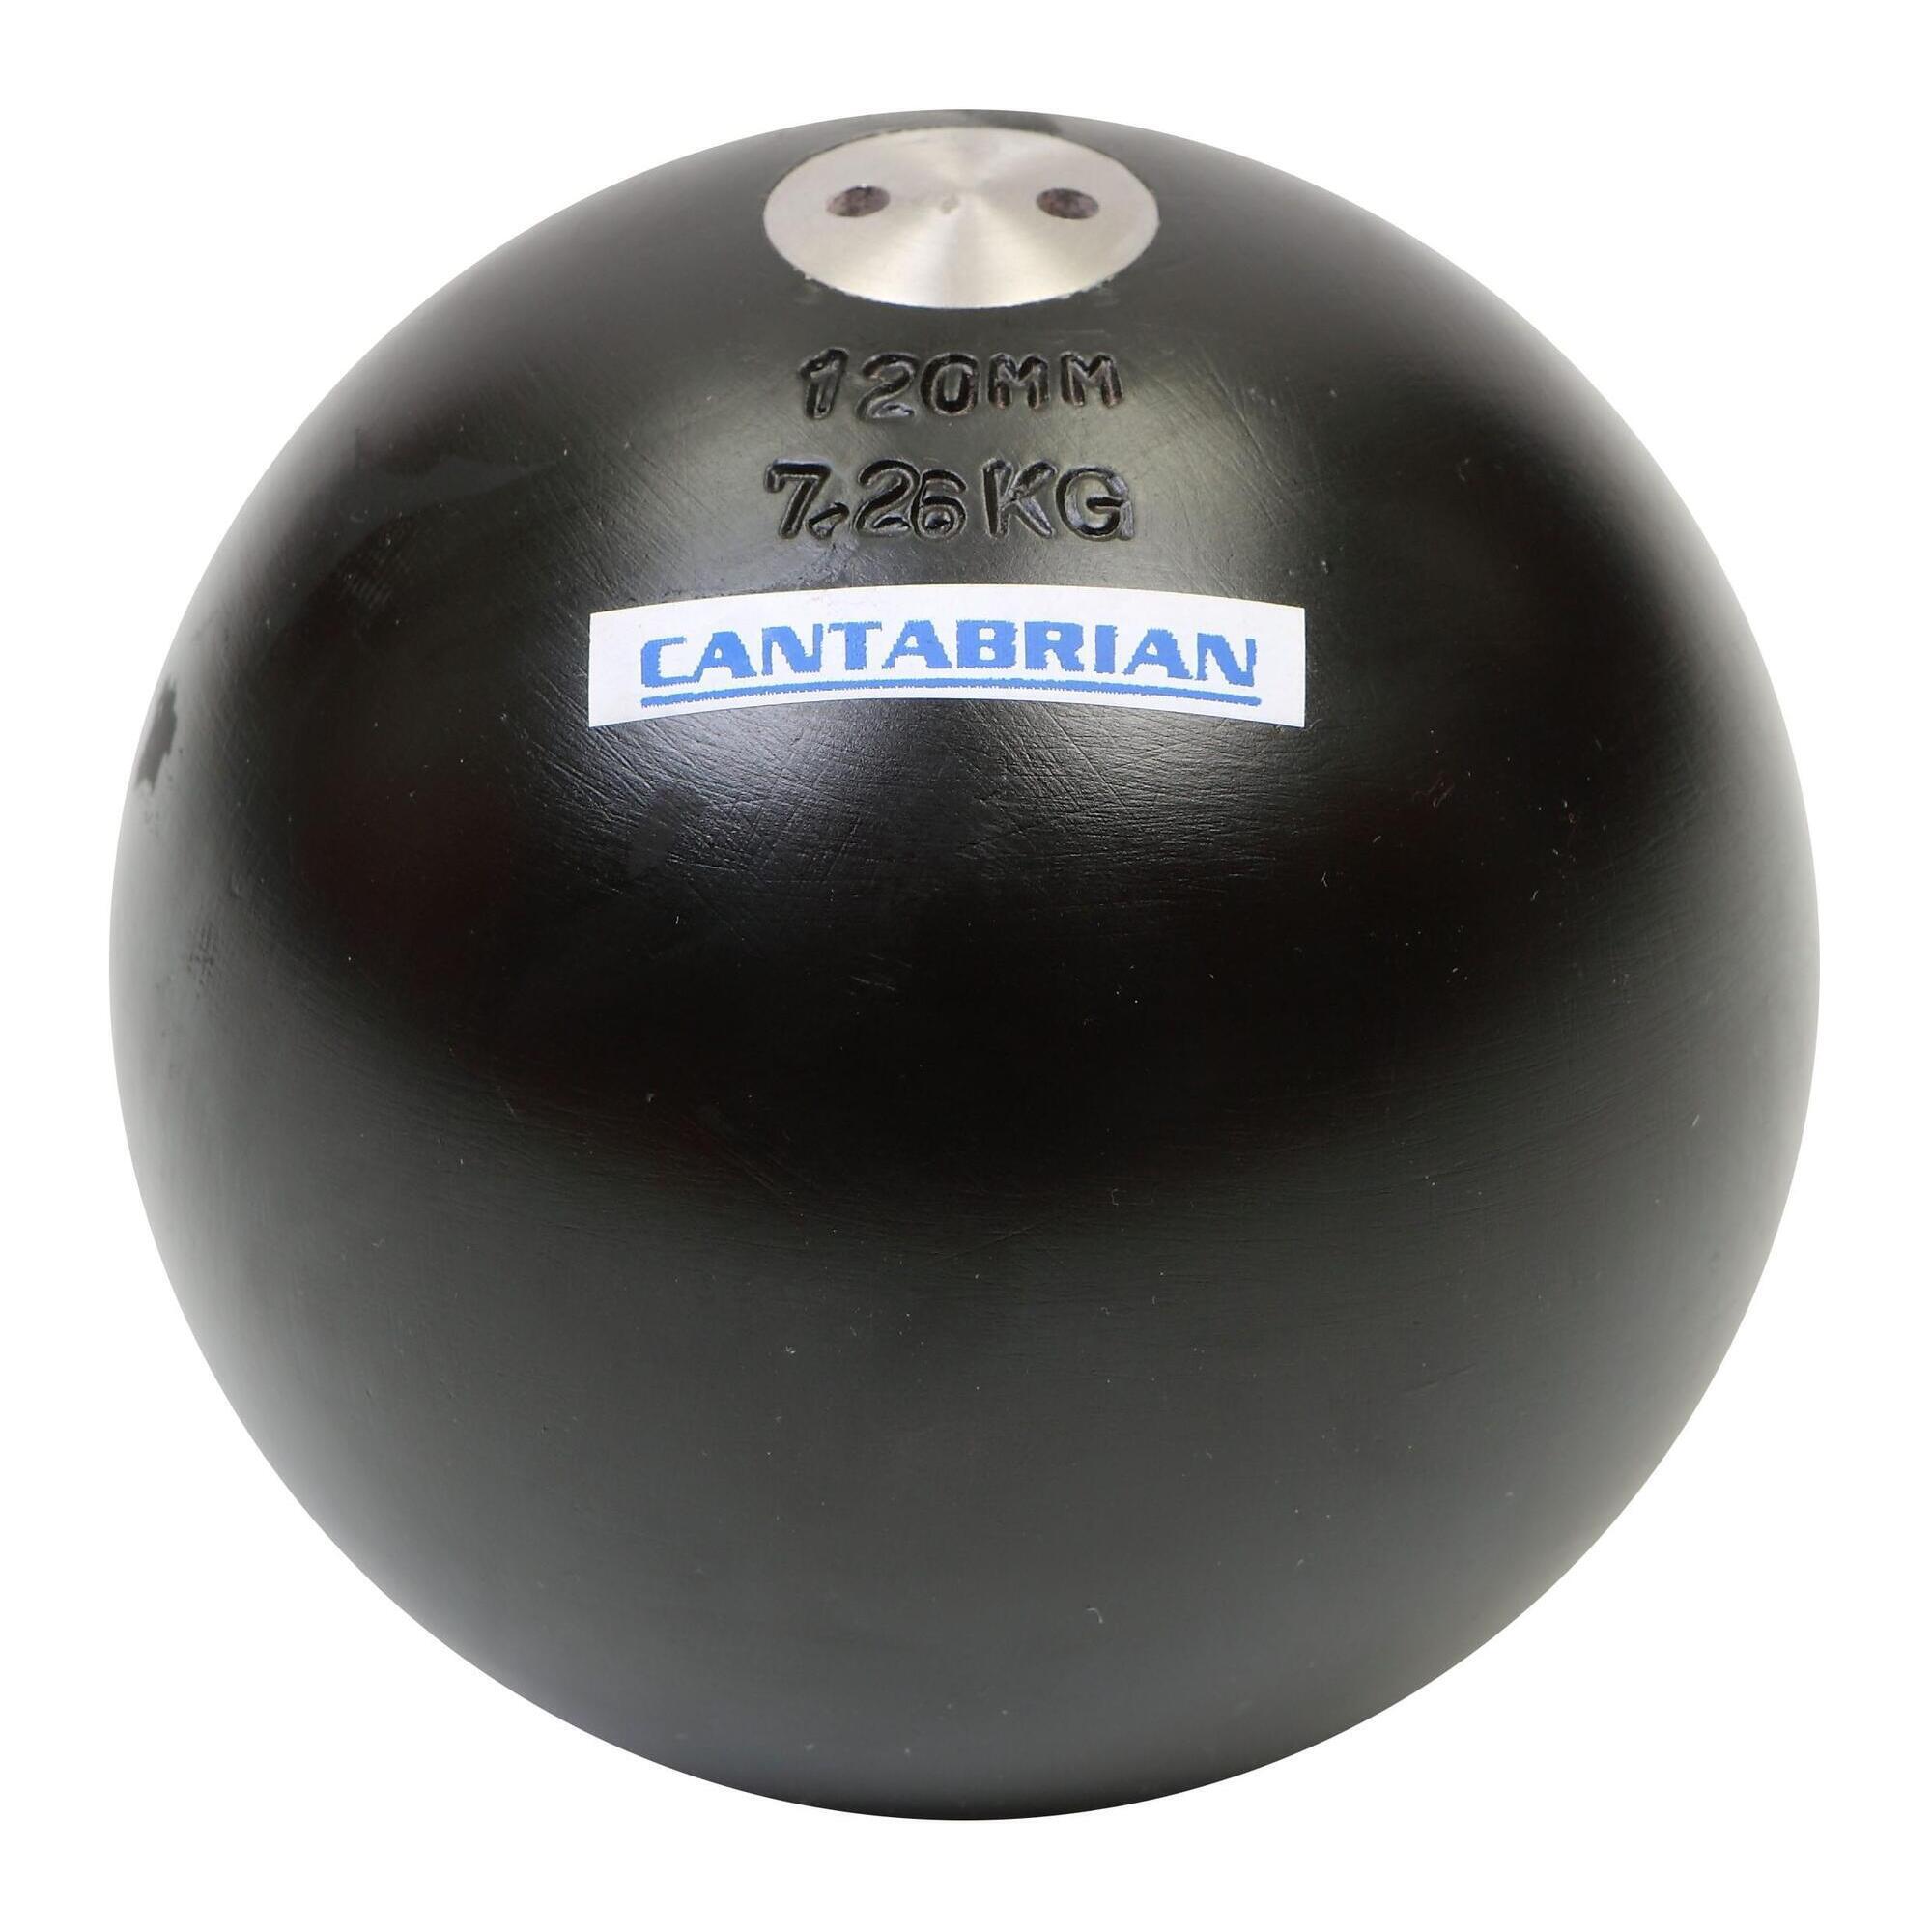 CANTABRIAN Cantabrian Olympic Steel Shot Puts - 110mm dia